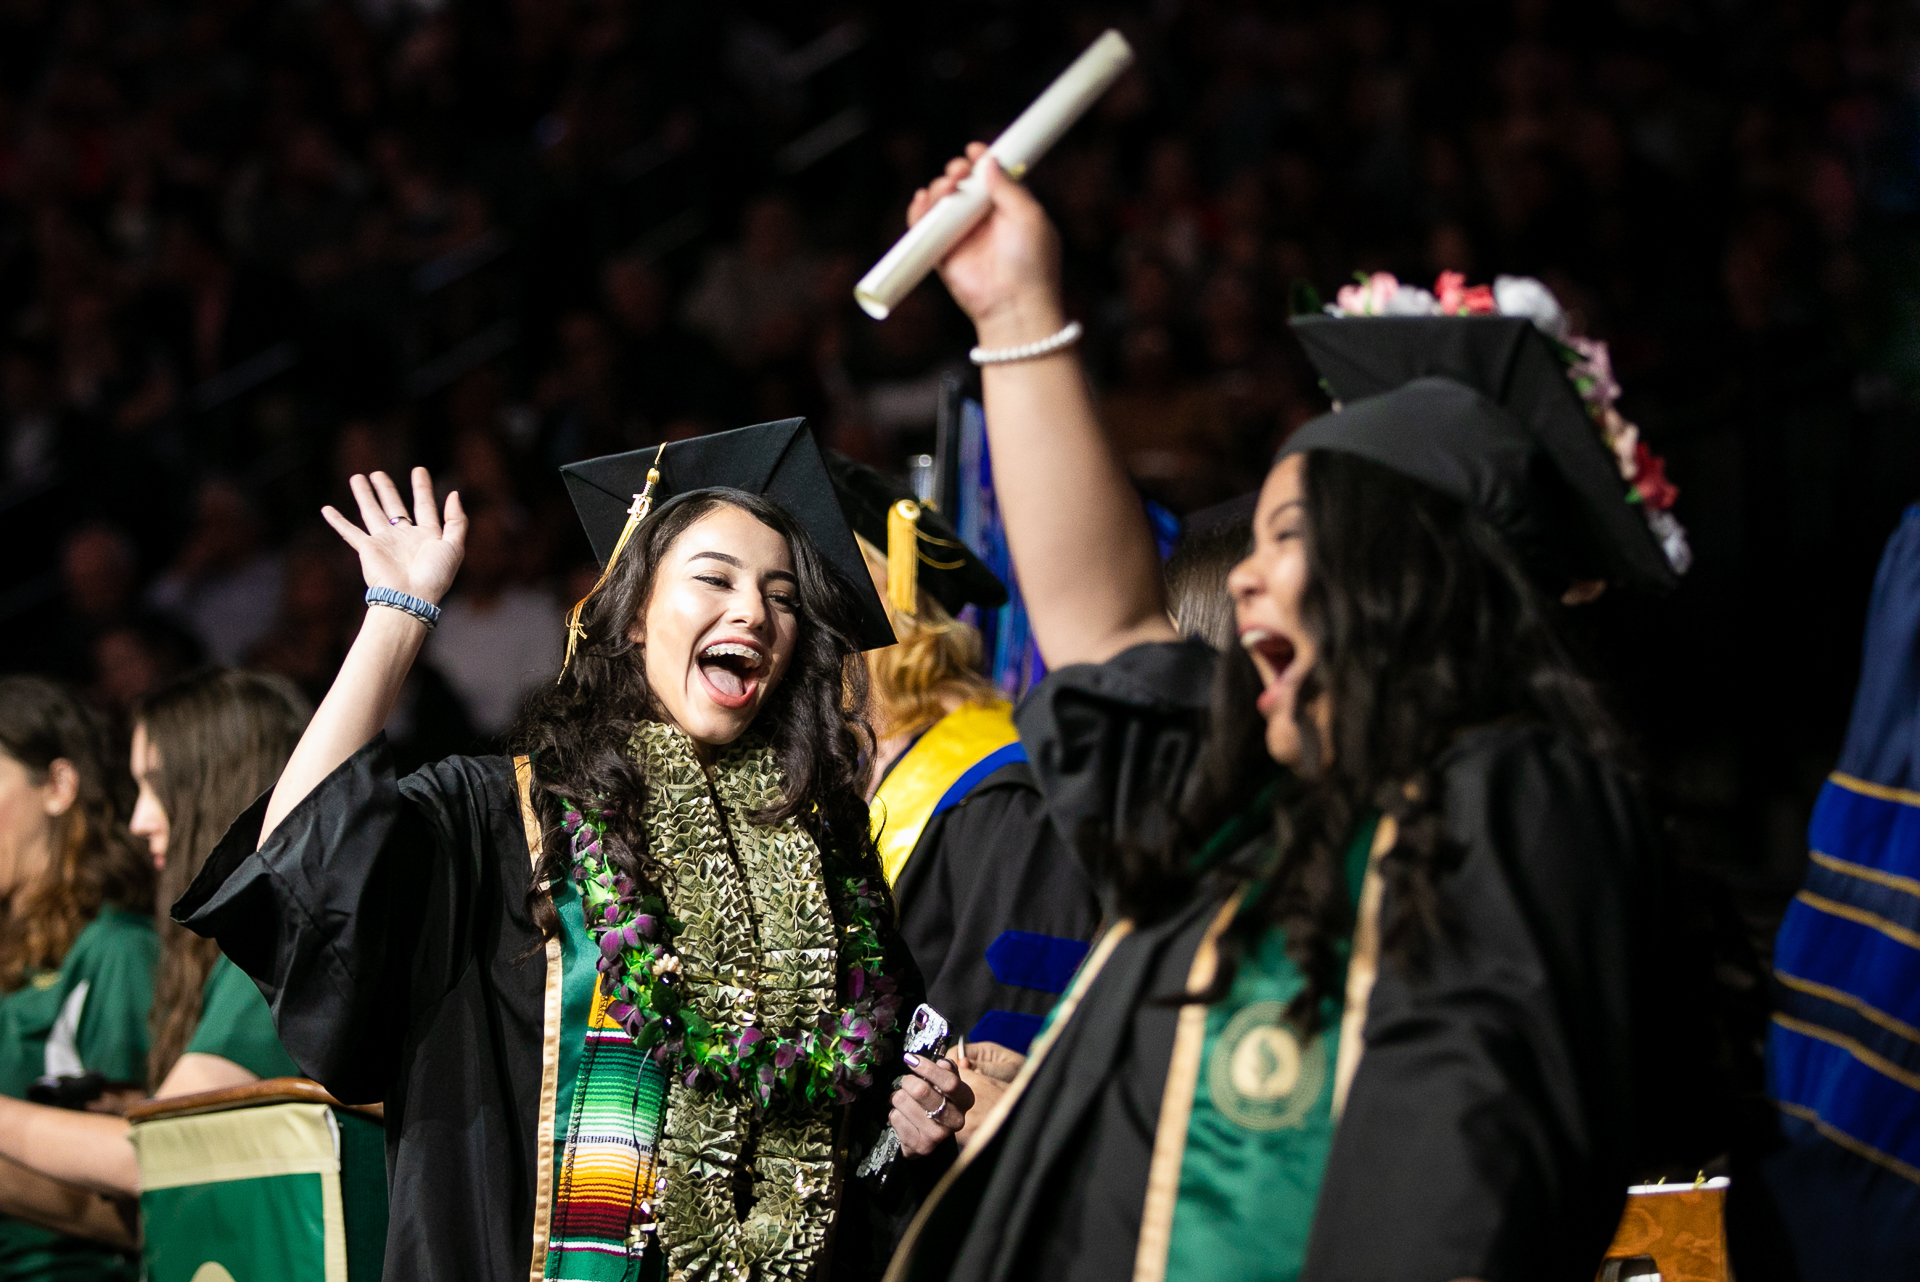 Record number 9,435 of students prepare to graduate during May 20